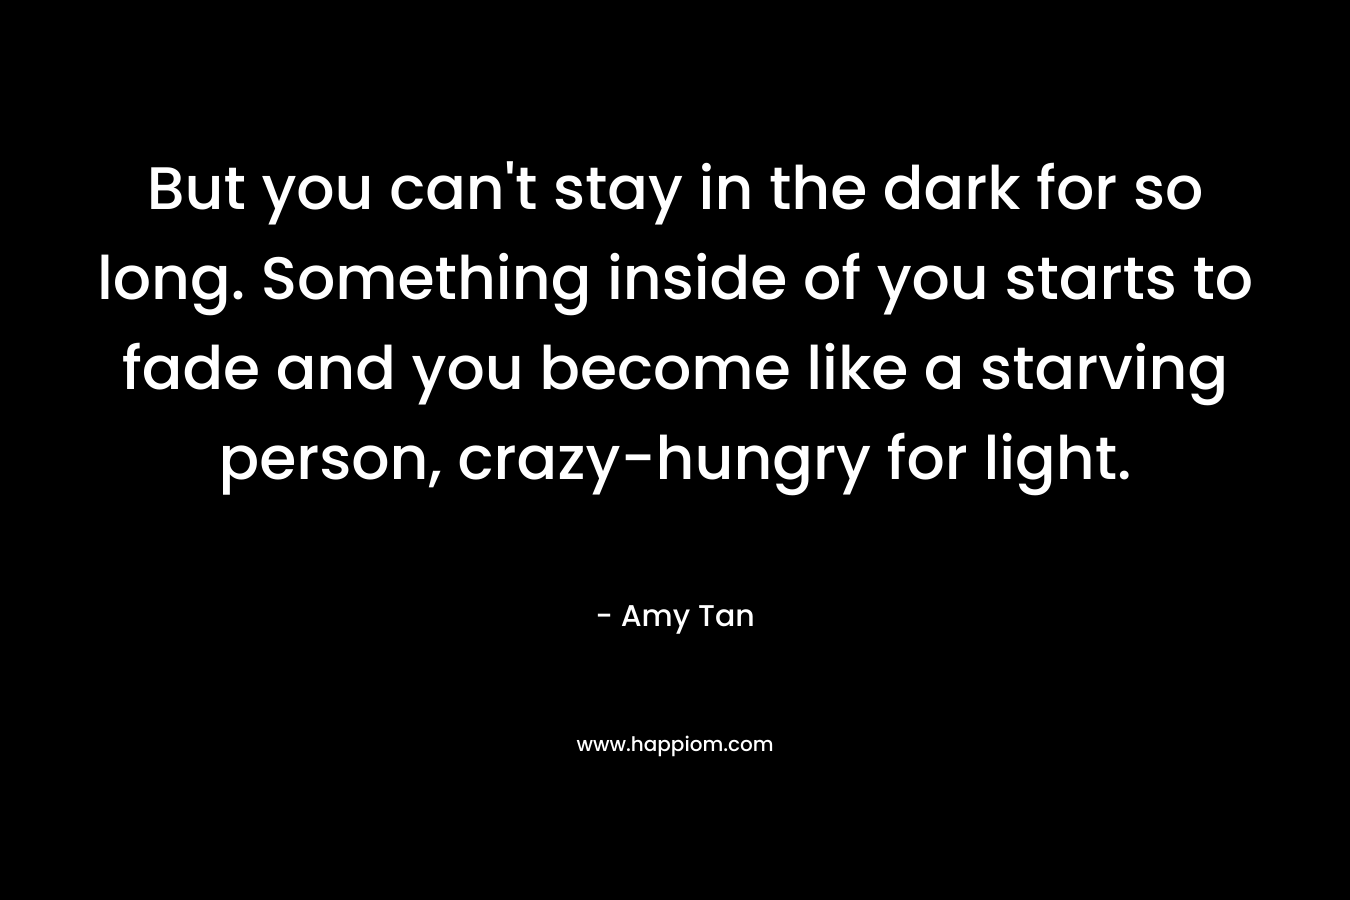 But you can't stay in the dark for so long. Something inside of you starts to fade and you become like a starving person, crazy-hungry for light.